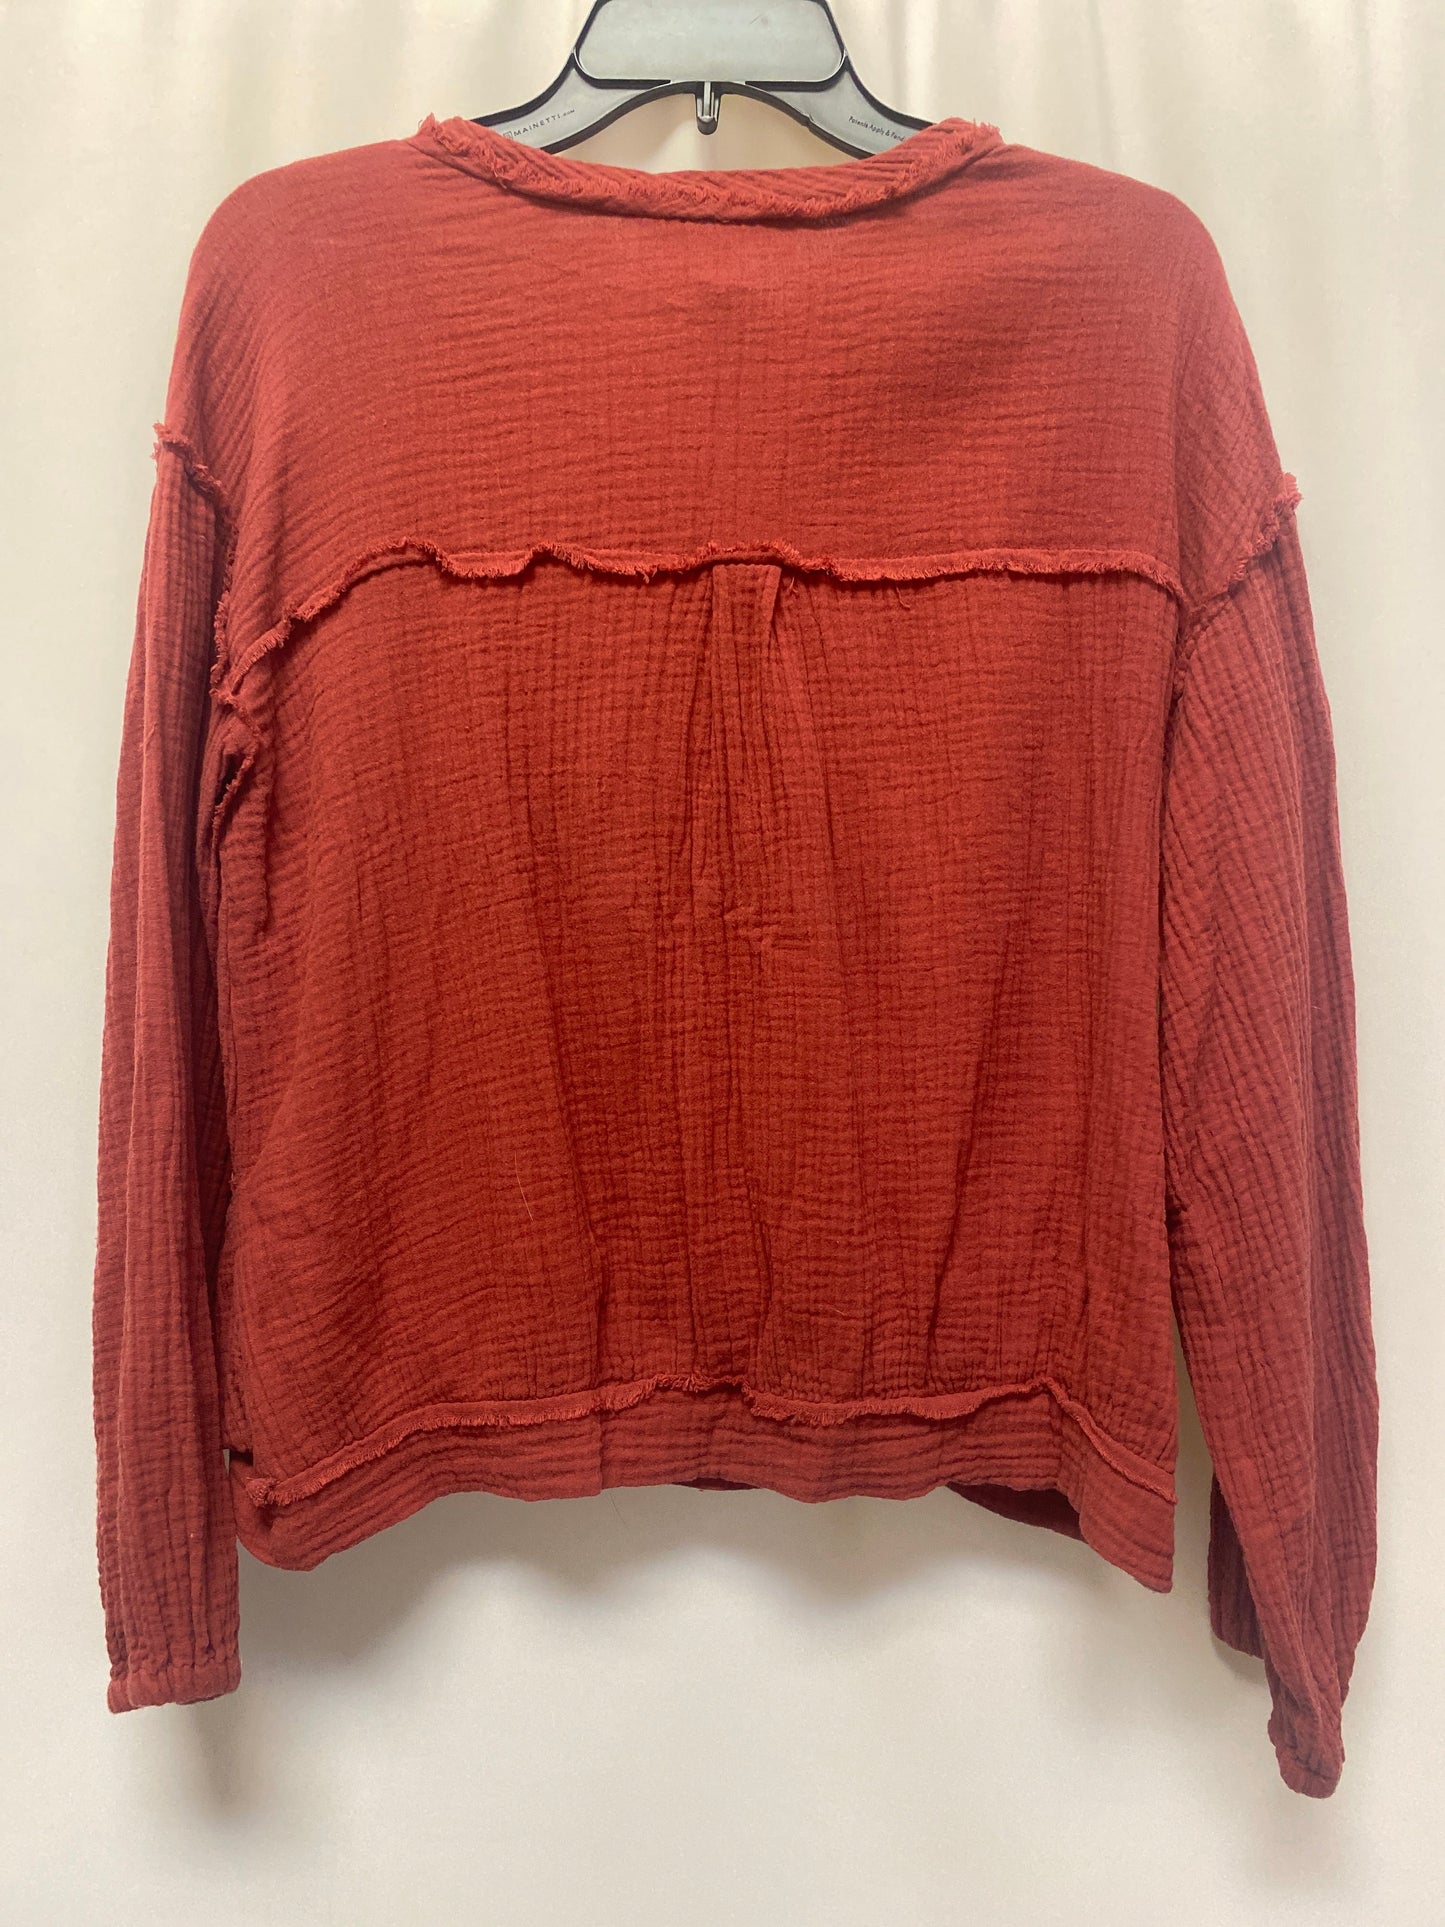 Red Top Long Sleeve Entro, Size M